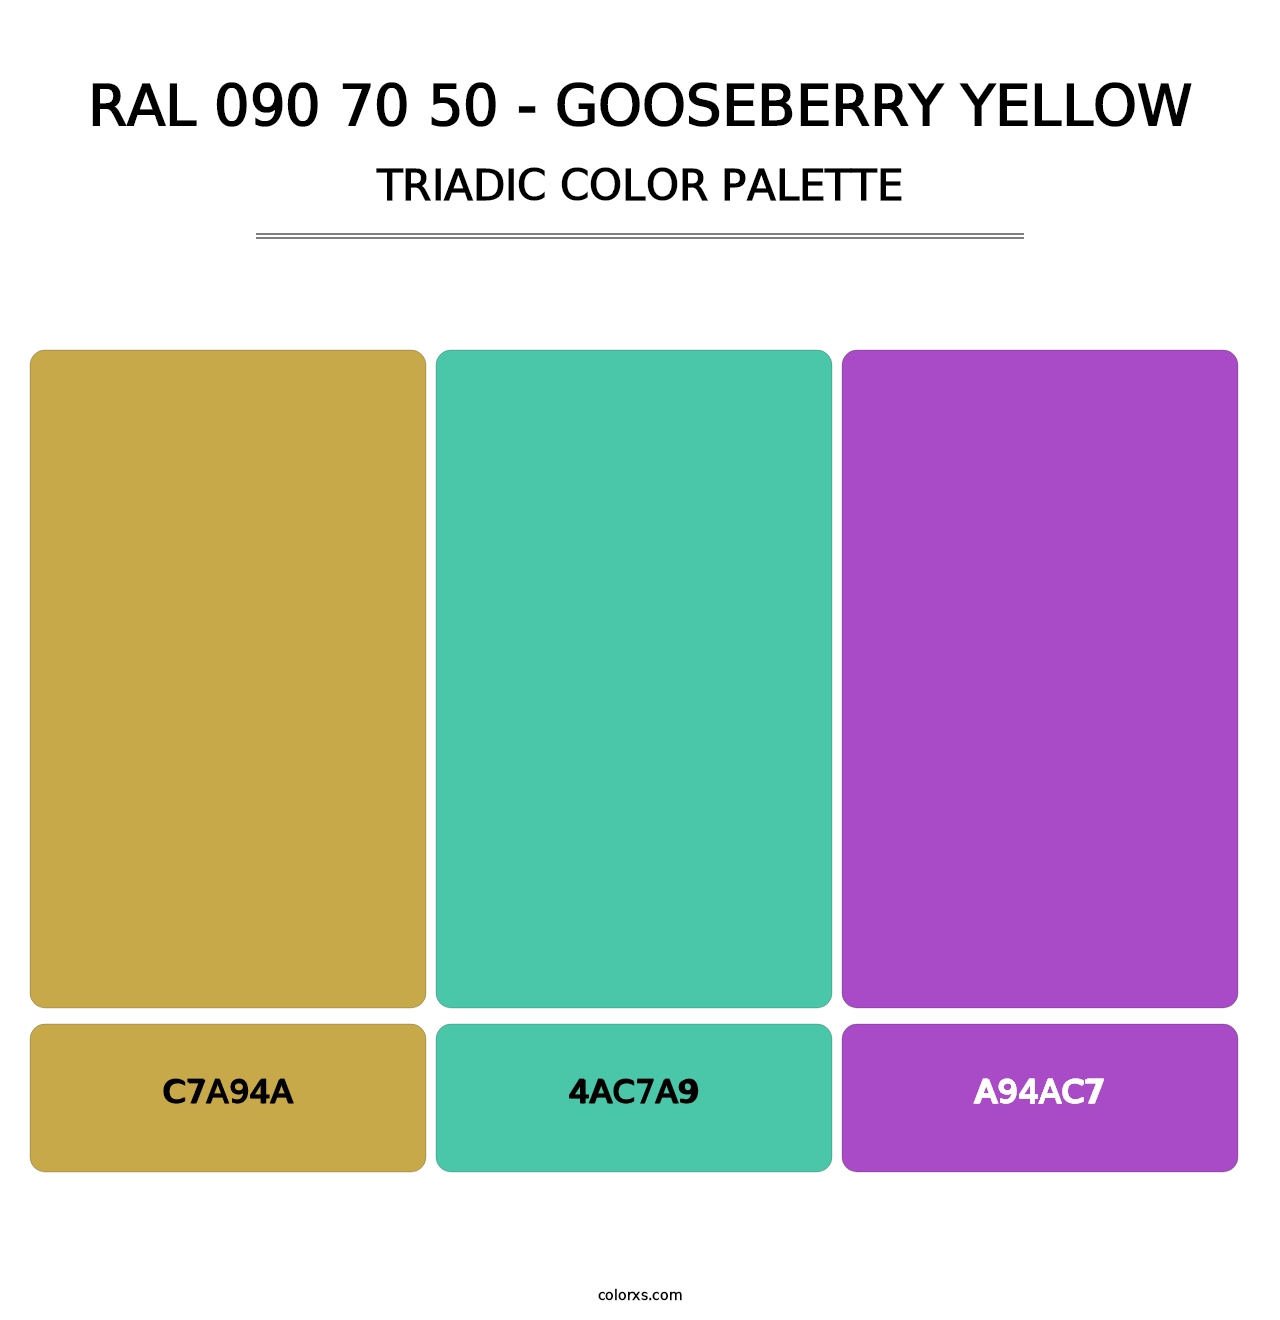 RAL 090 70 50 - Gooseberry Yellow - Triadic Color Palette